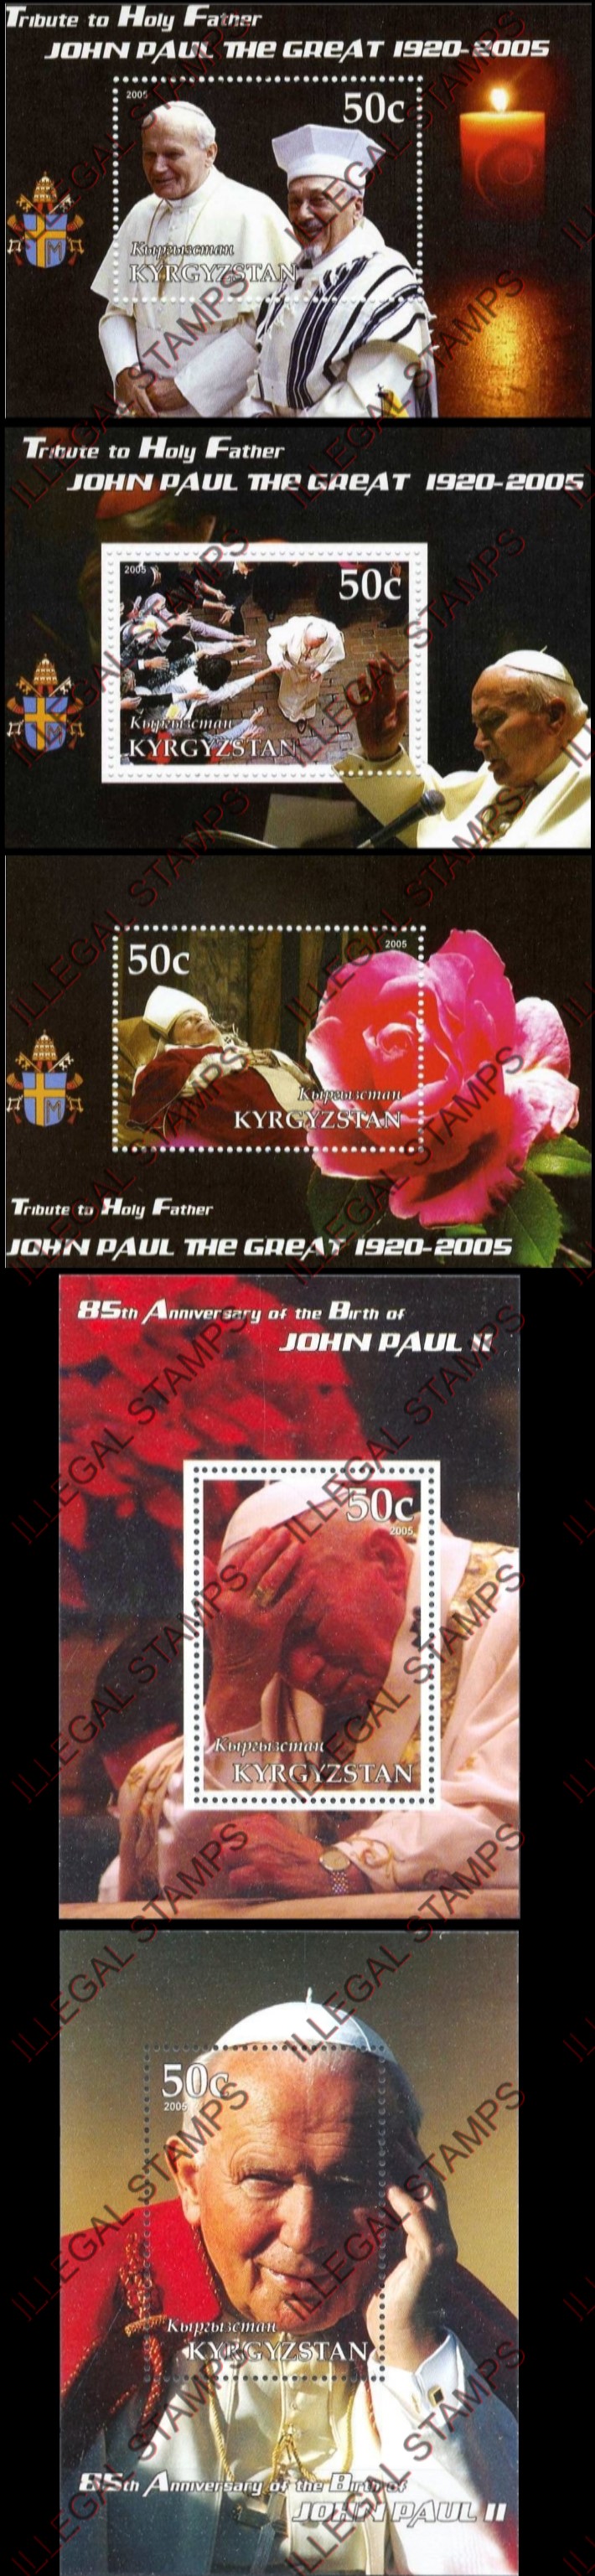 Kyrgyzstan 2005 Pope John Paul II Illegal Stamp Souvenir Sheets of One